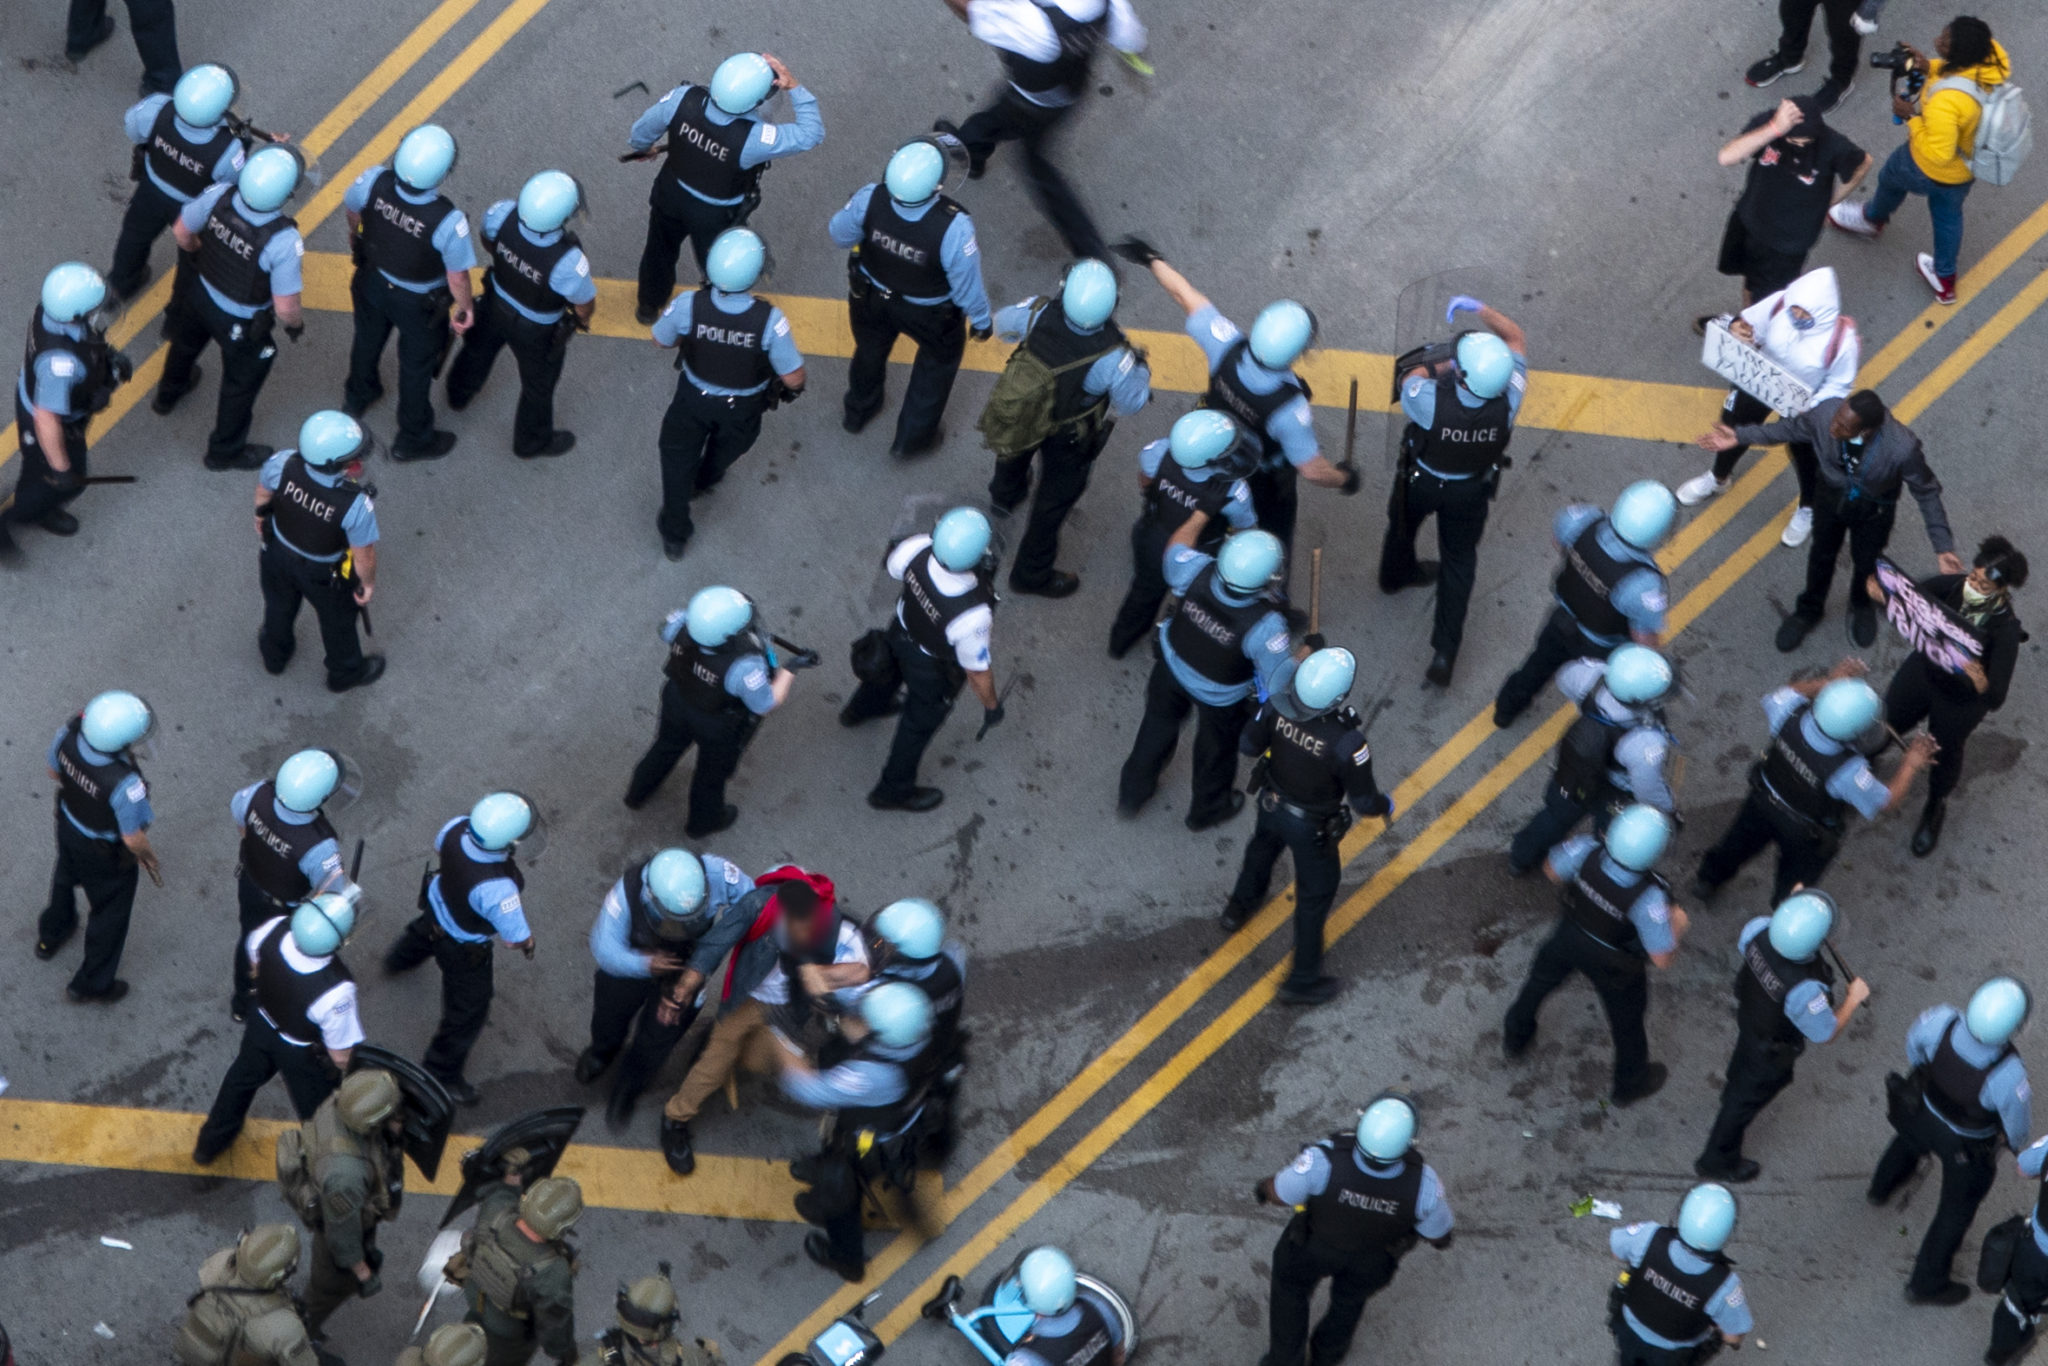 Police at a protest on State Street in downtown Chicago, May 30, 2020.